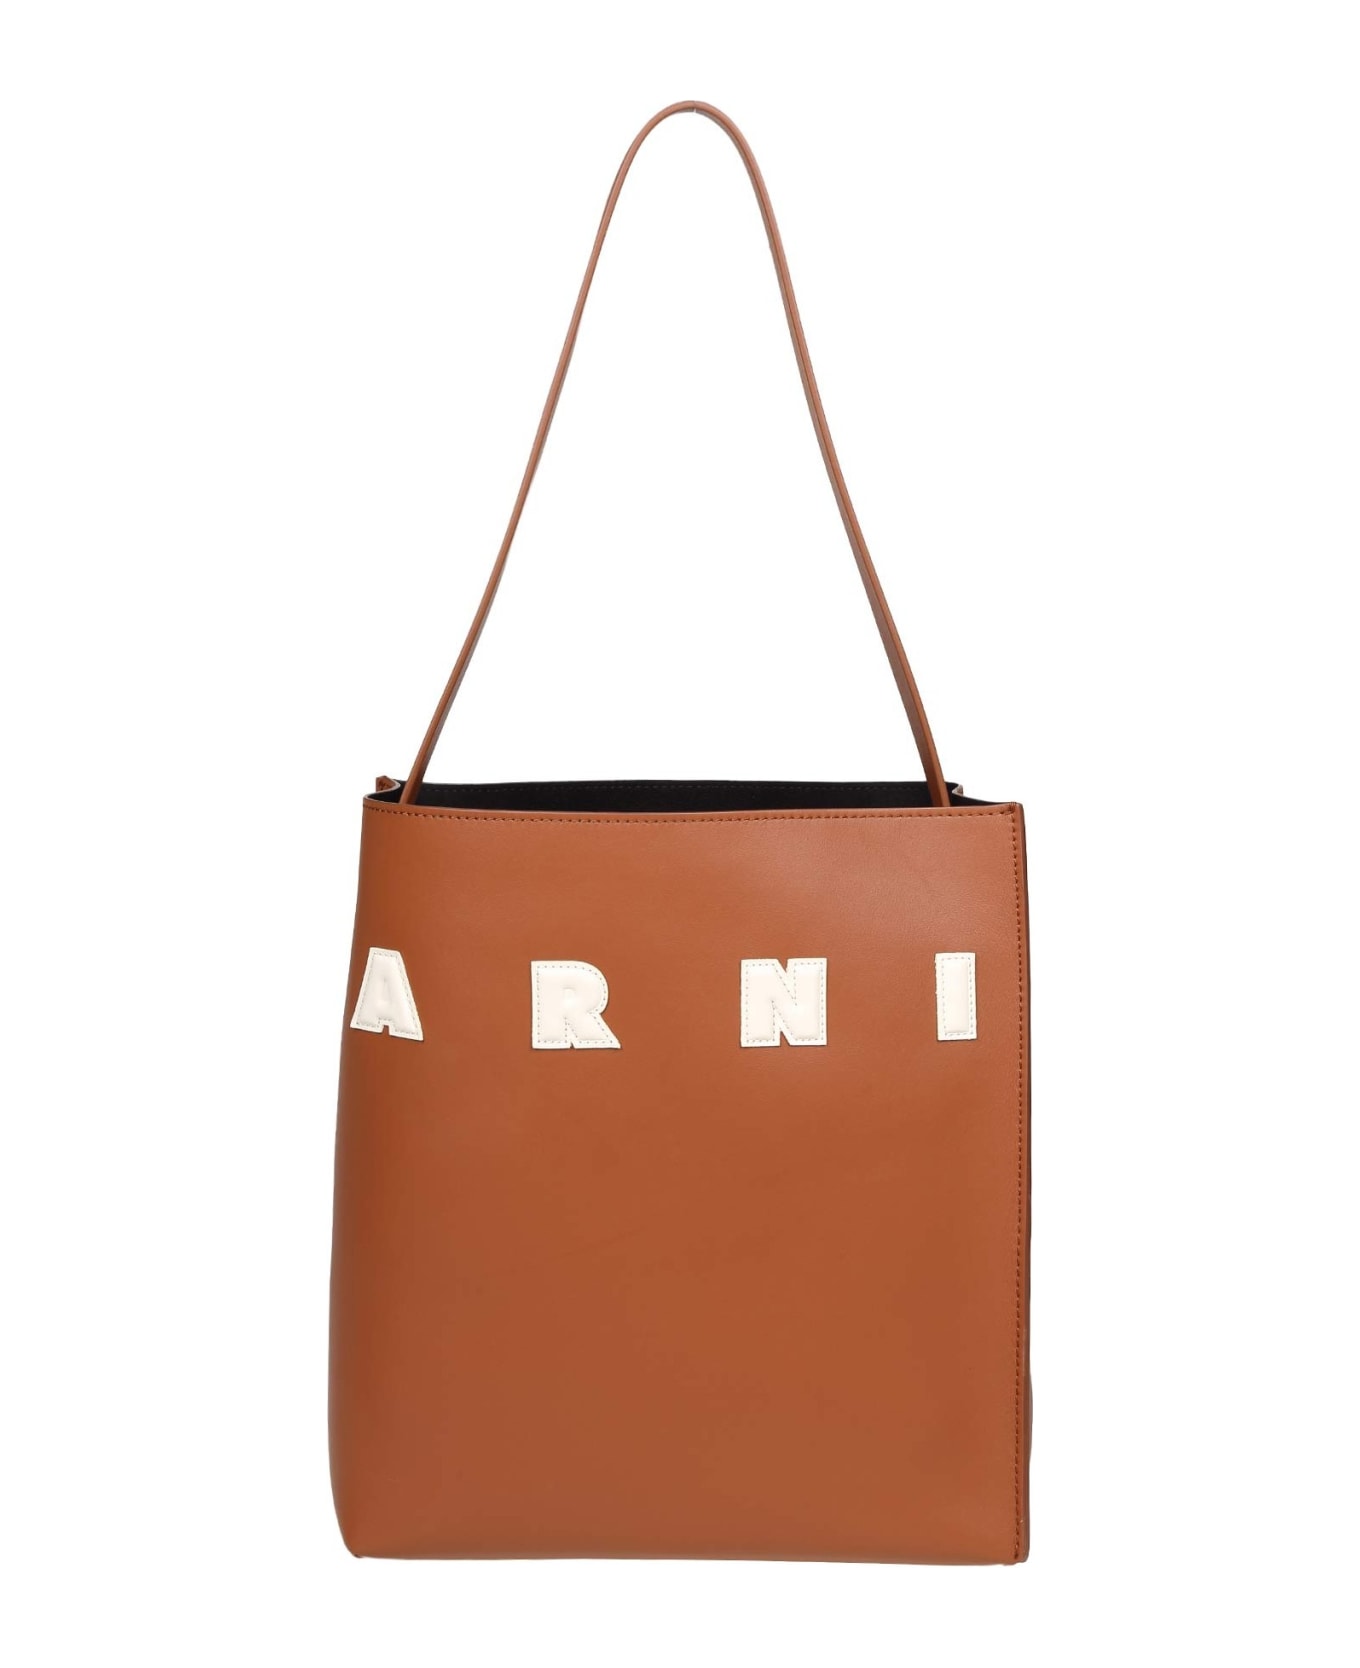 Marni Museo Hobo Bag In Tan Color Leather - Leather